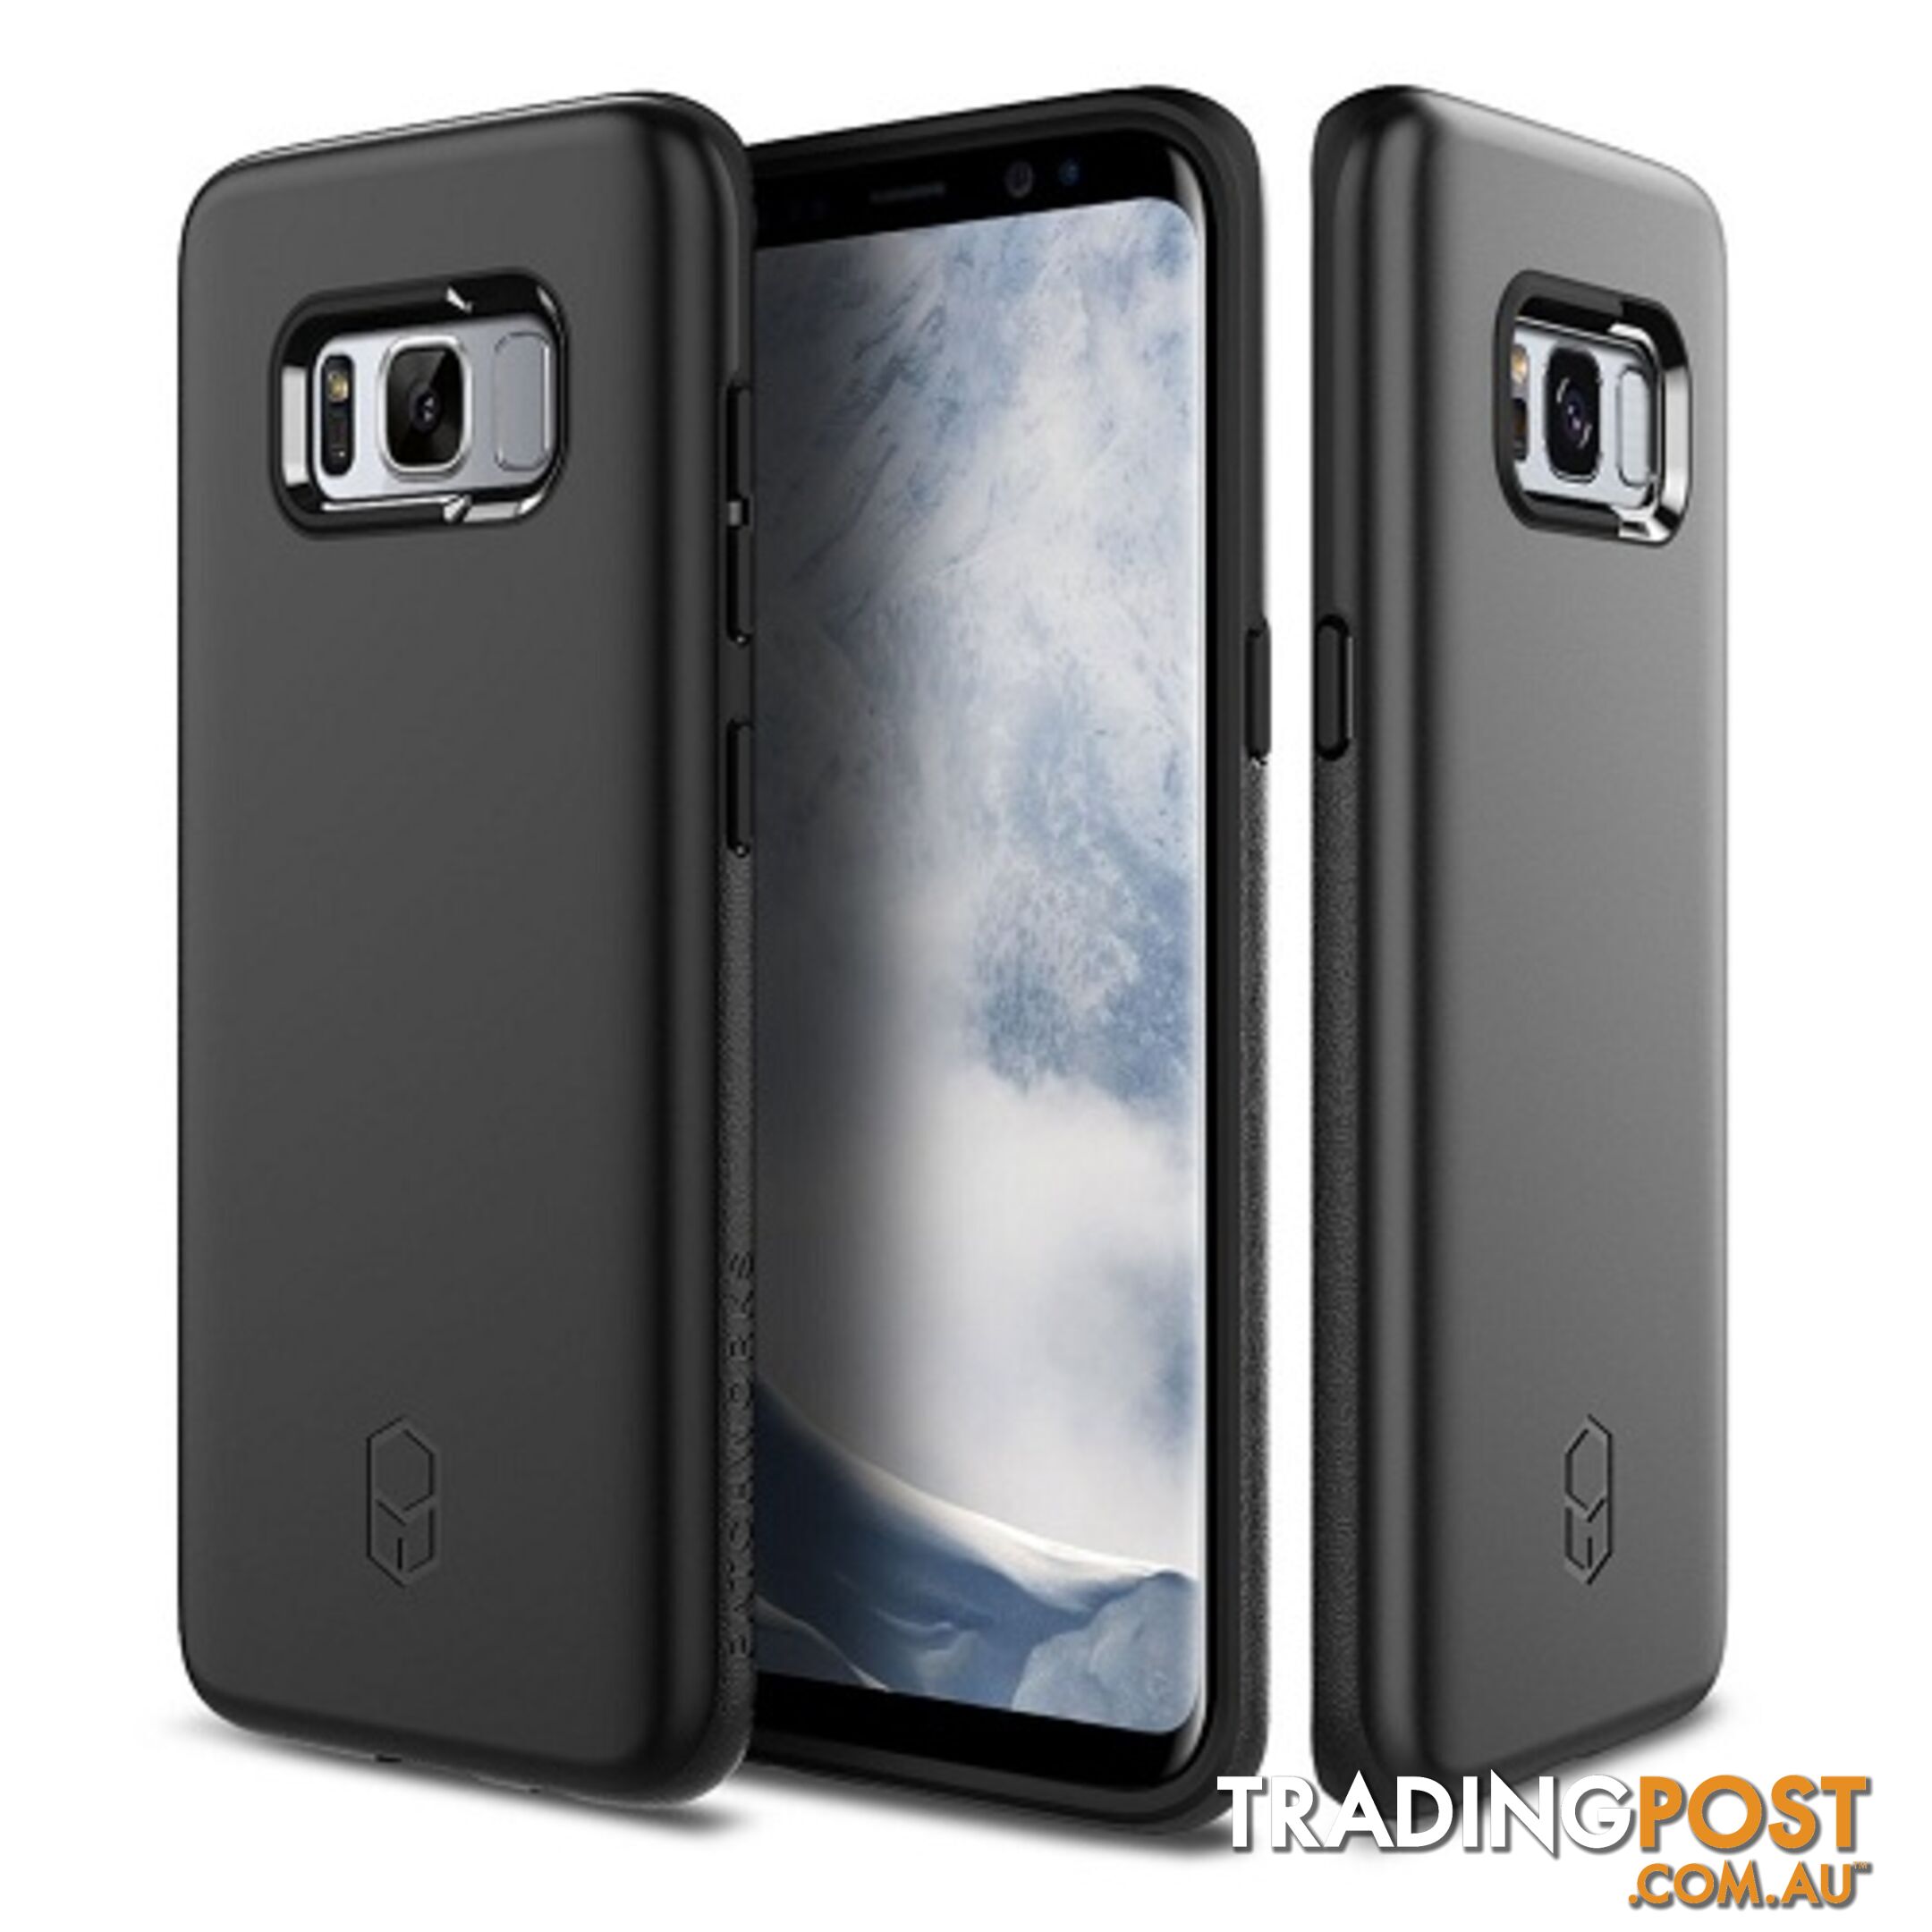 Patchworks ITG Level Rugged Case for Samsung Galaxy S8 Plus - Black - 8809453317763/ITGL139 - Patchworks